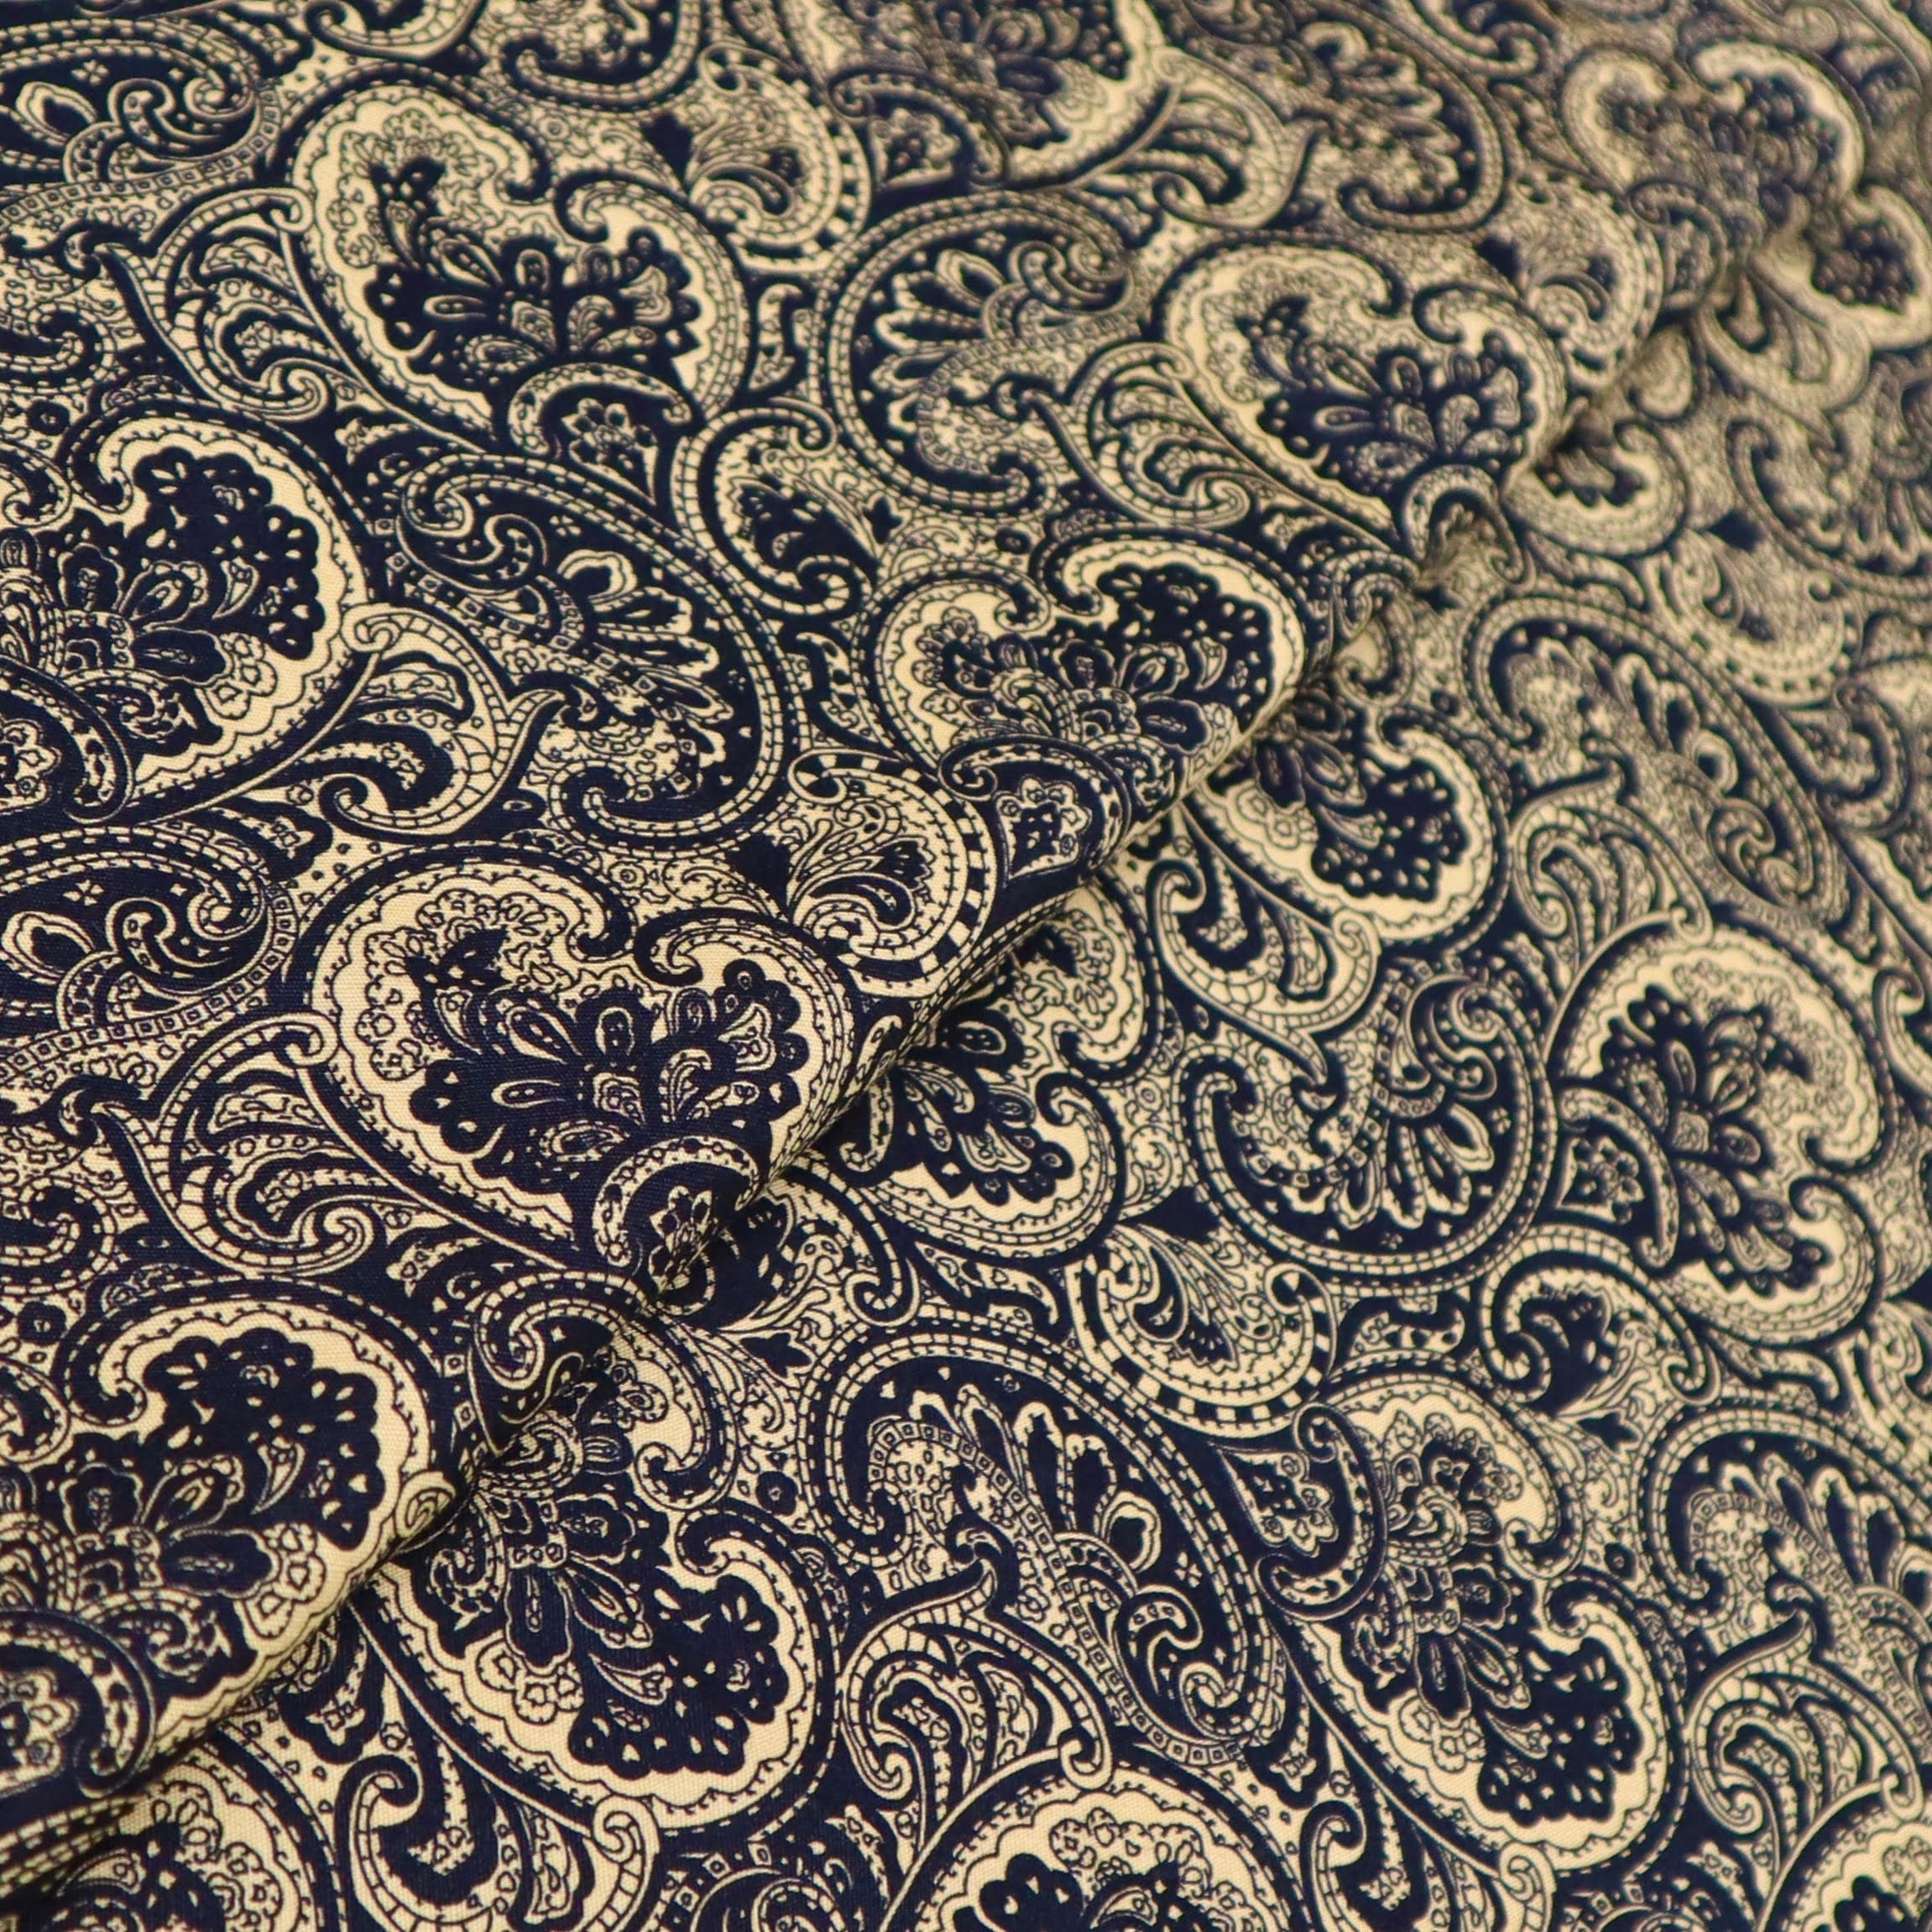 Yellow Gold and Black Paisley Printed Cotton Fabric | Etsy